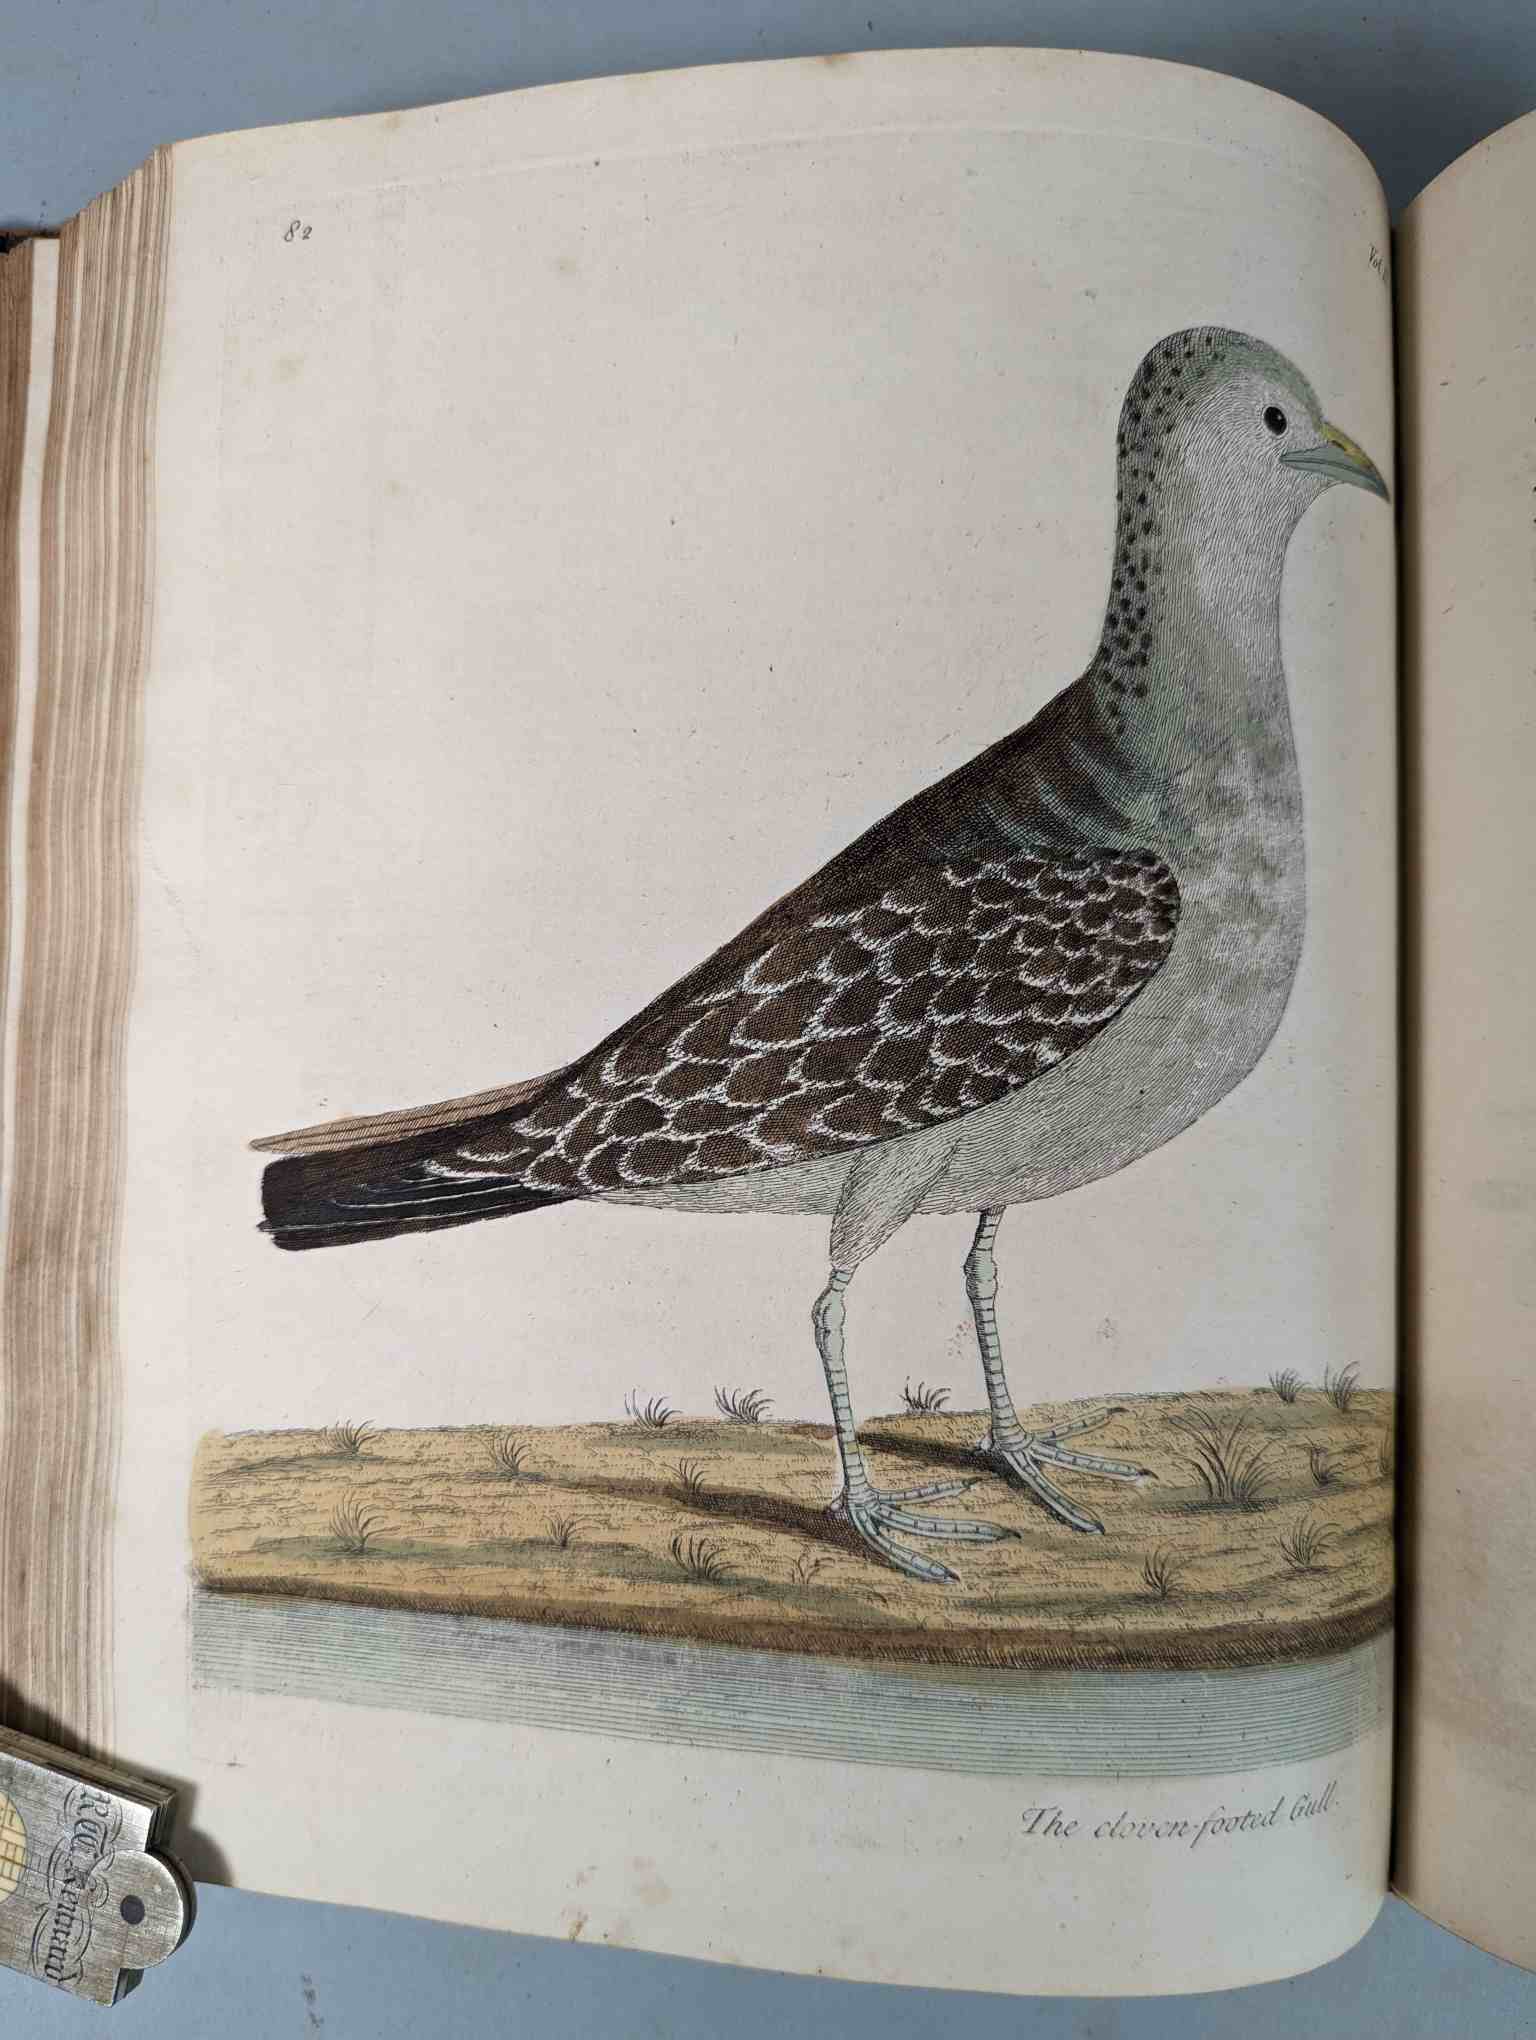 ALBIN, Eleazar. A Natural History of Birds, to which are added, Notes and Observations by W. - Image 186 of 208